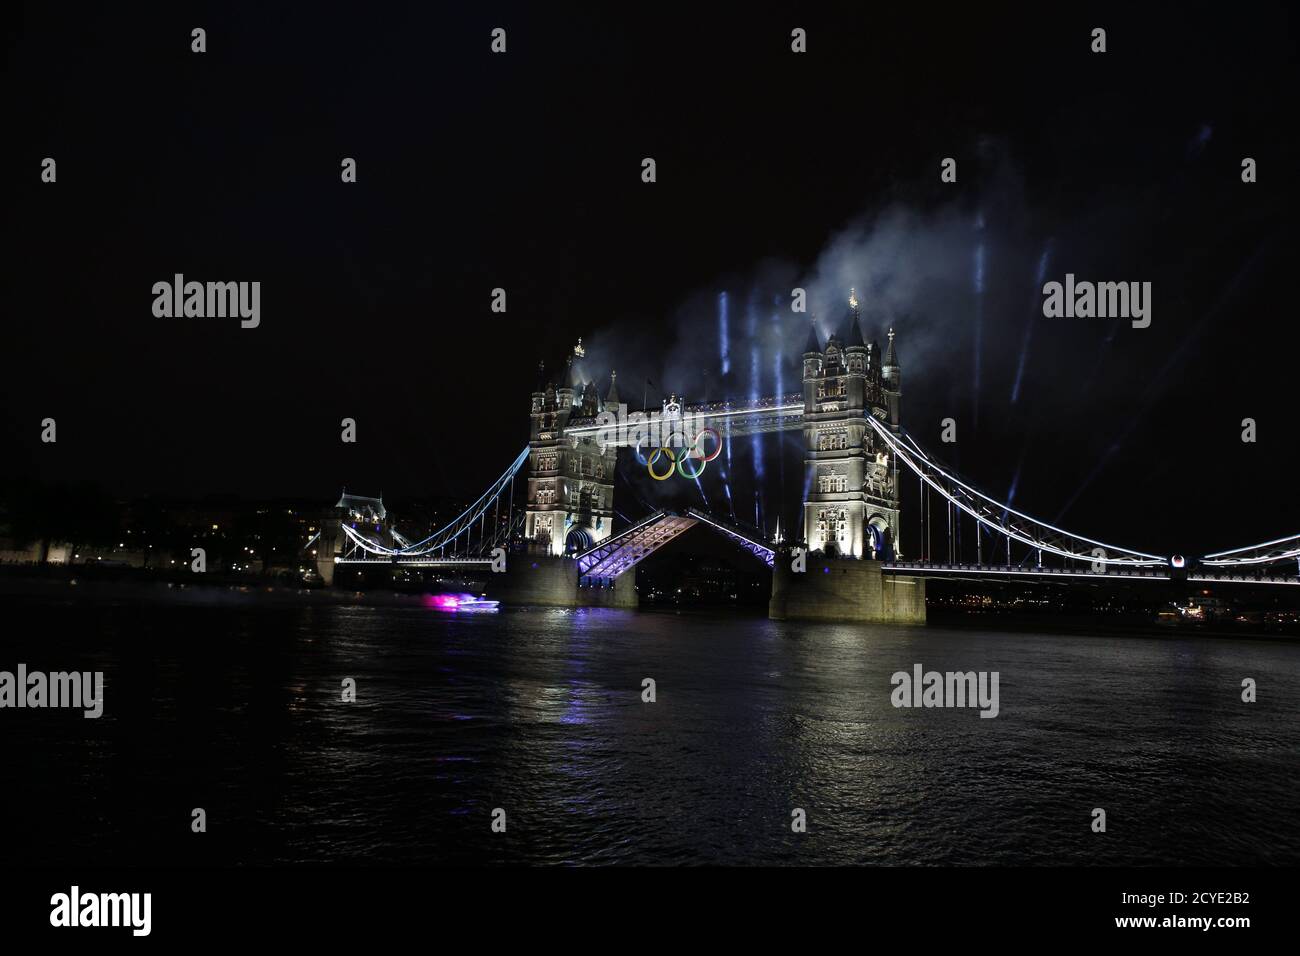 A speedboat carrying footballer David Beckham holding the Olympic torch, races under the Tower Bridge during the opening ceremony of London 2012 Olympic Games July 27, 2012. REUTERS/Mark Blinch (BRITAIN - Tags: SPORT OLYMPICS) BEST QUALITY AVAILABLE Stock Photo